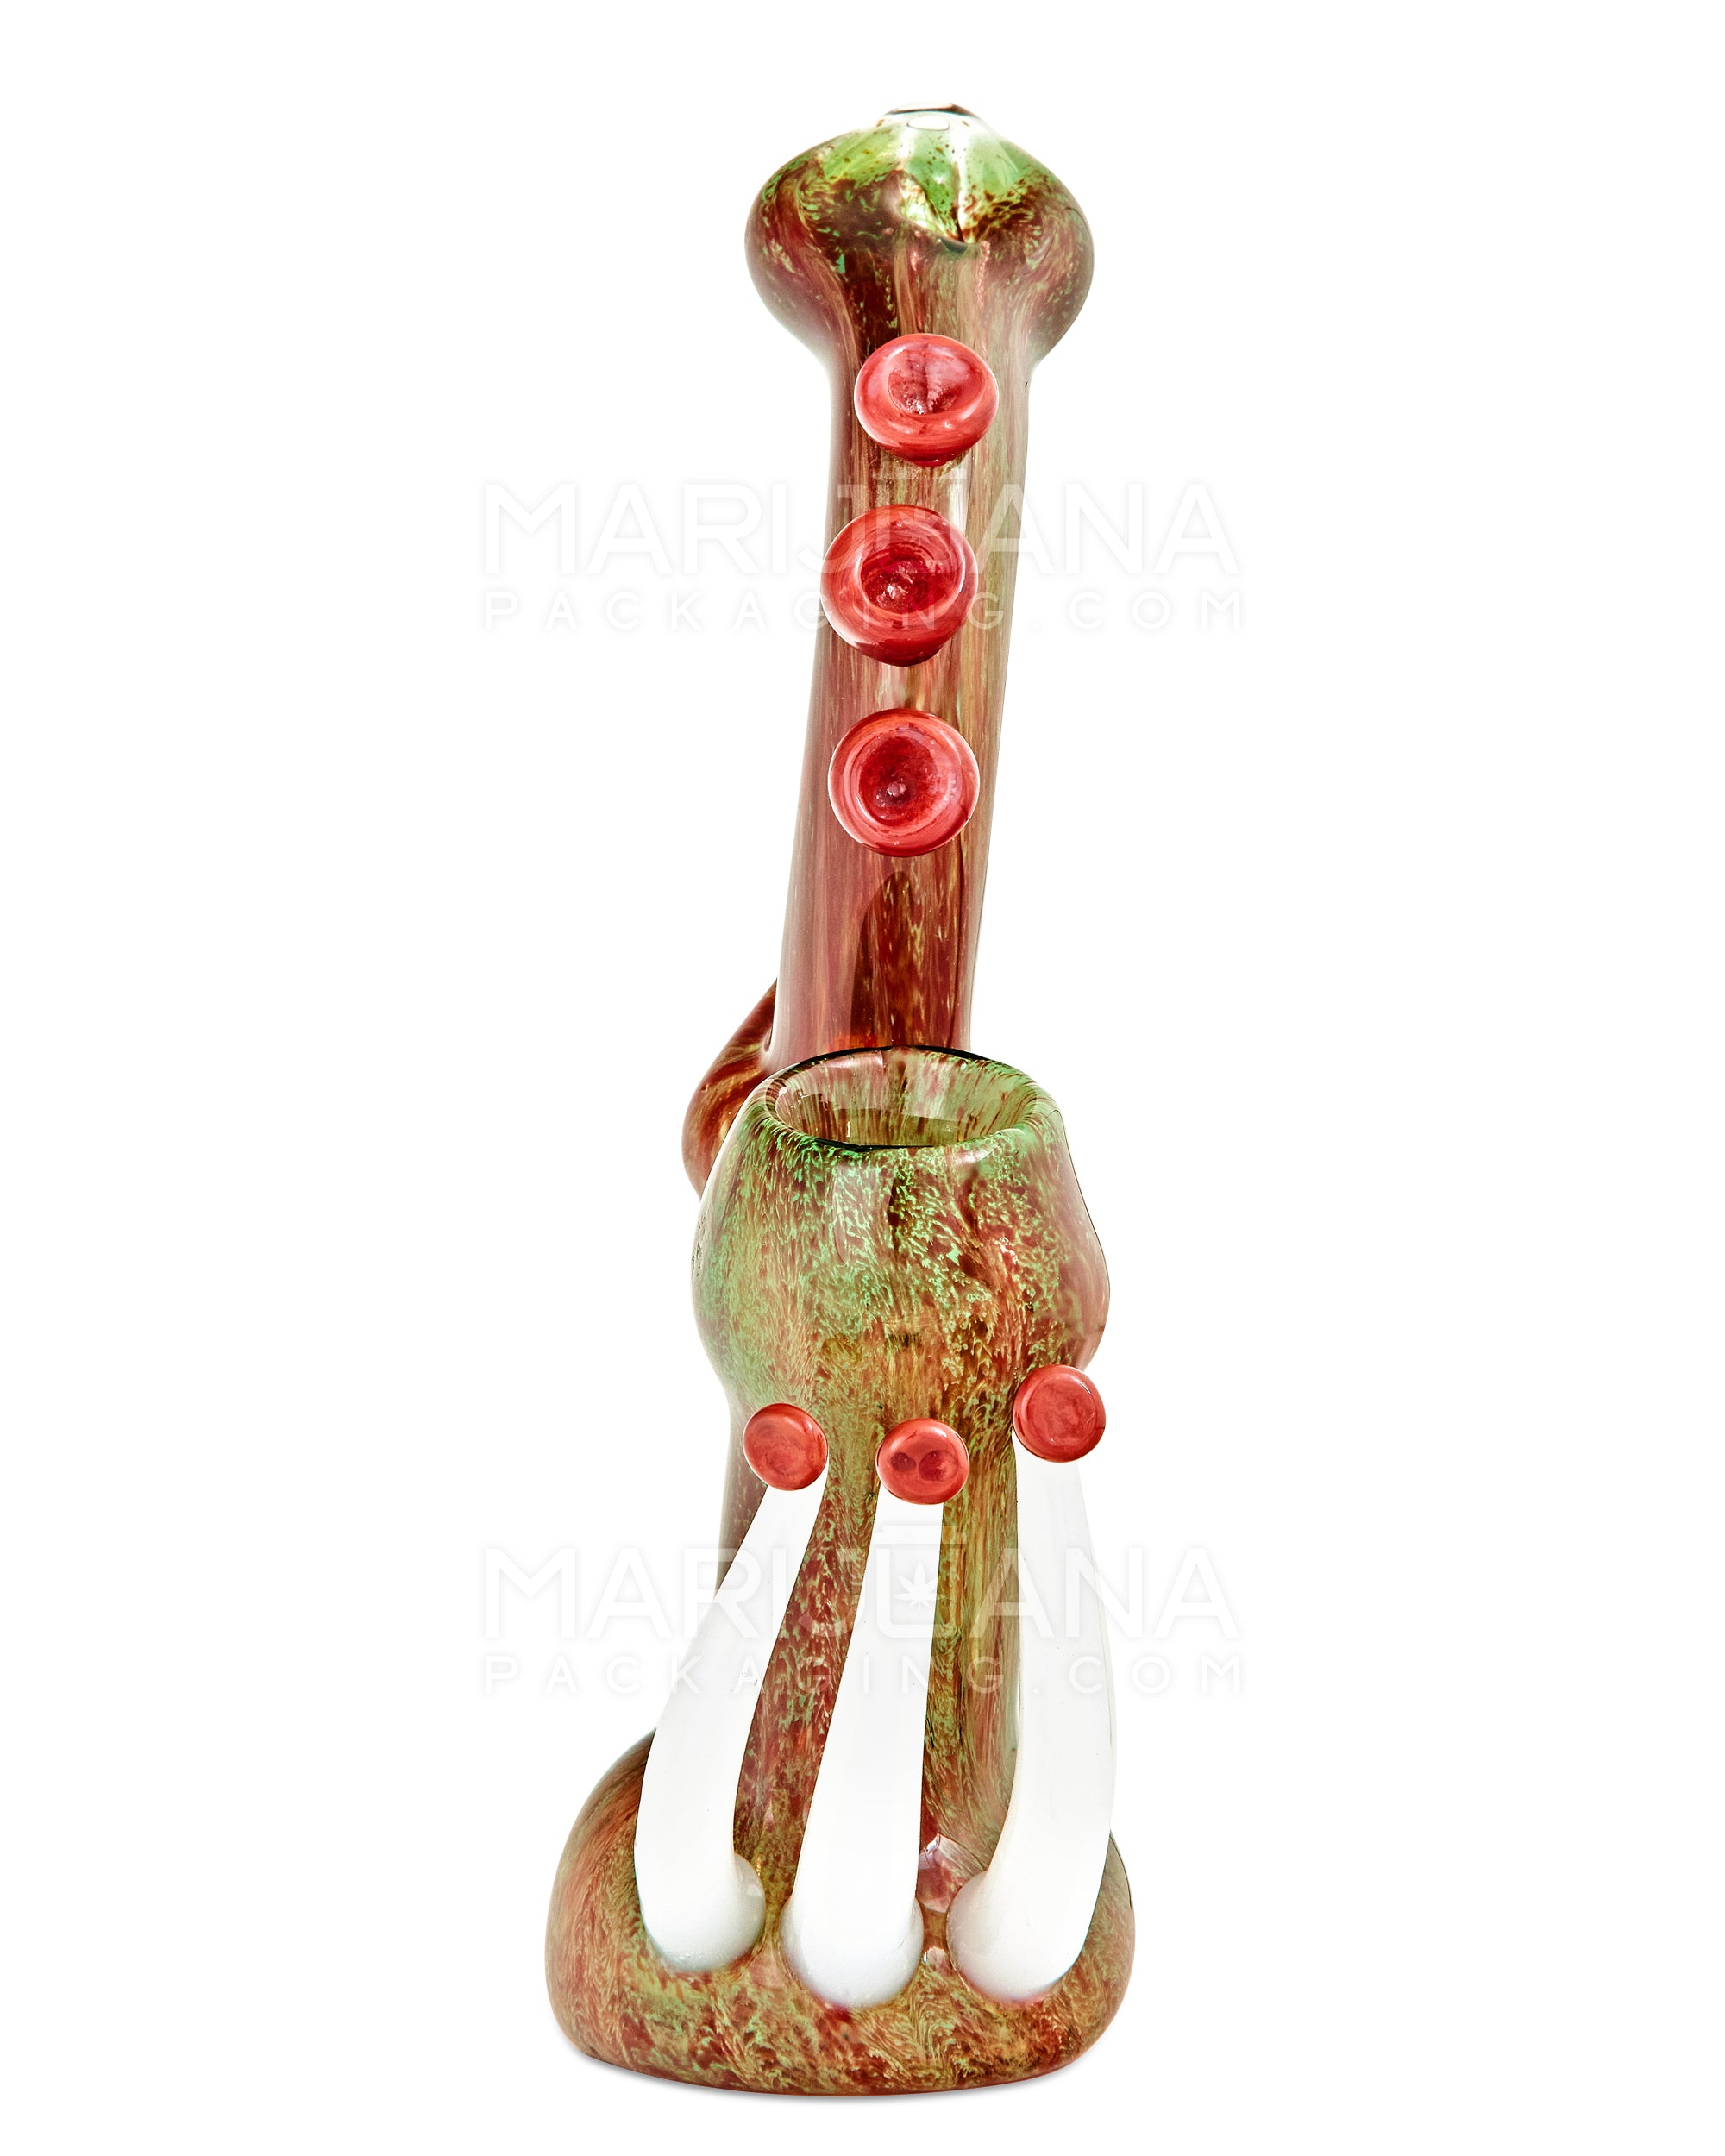 Heady | Donut Mouth Color Pull Kraken Bubbler w/ Triple Tentacles | 9in Tall - Glass - Red & Green - 11